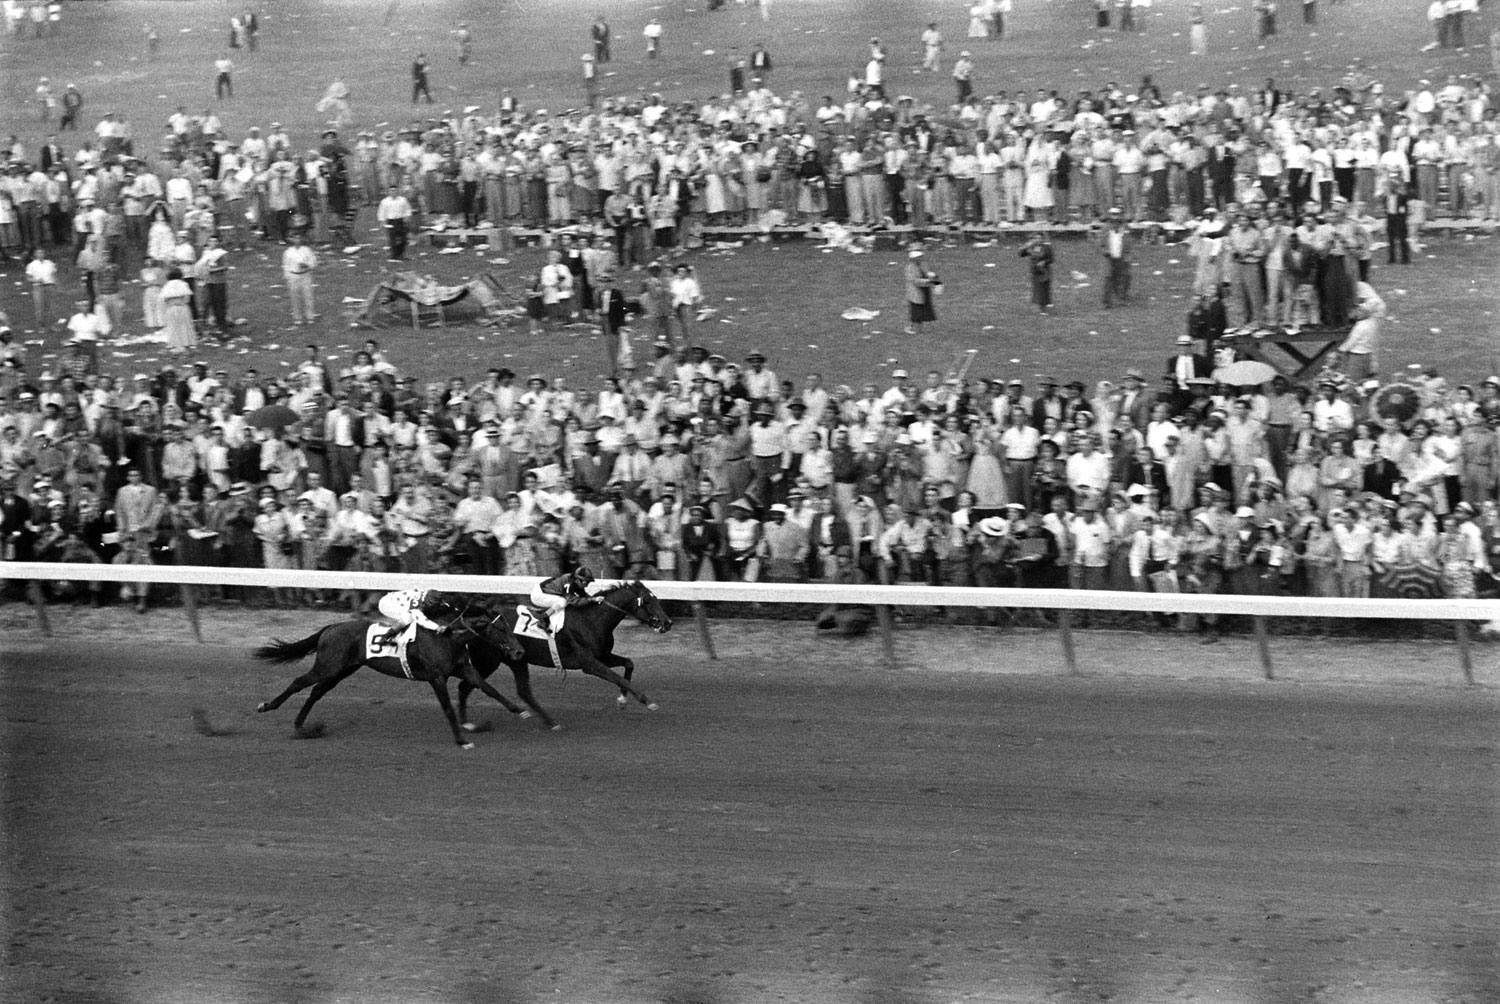 Swaps pulls away from Nashua to take the win during the 1955 Kentucky Derby.